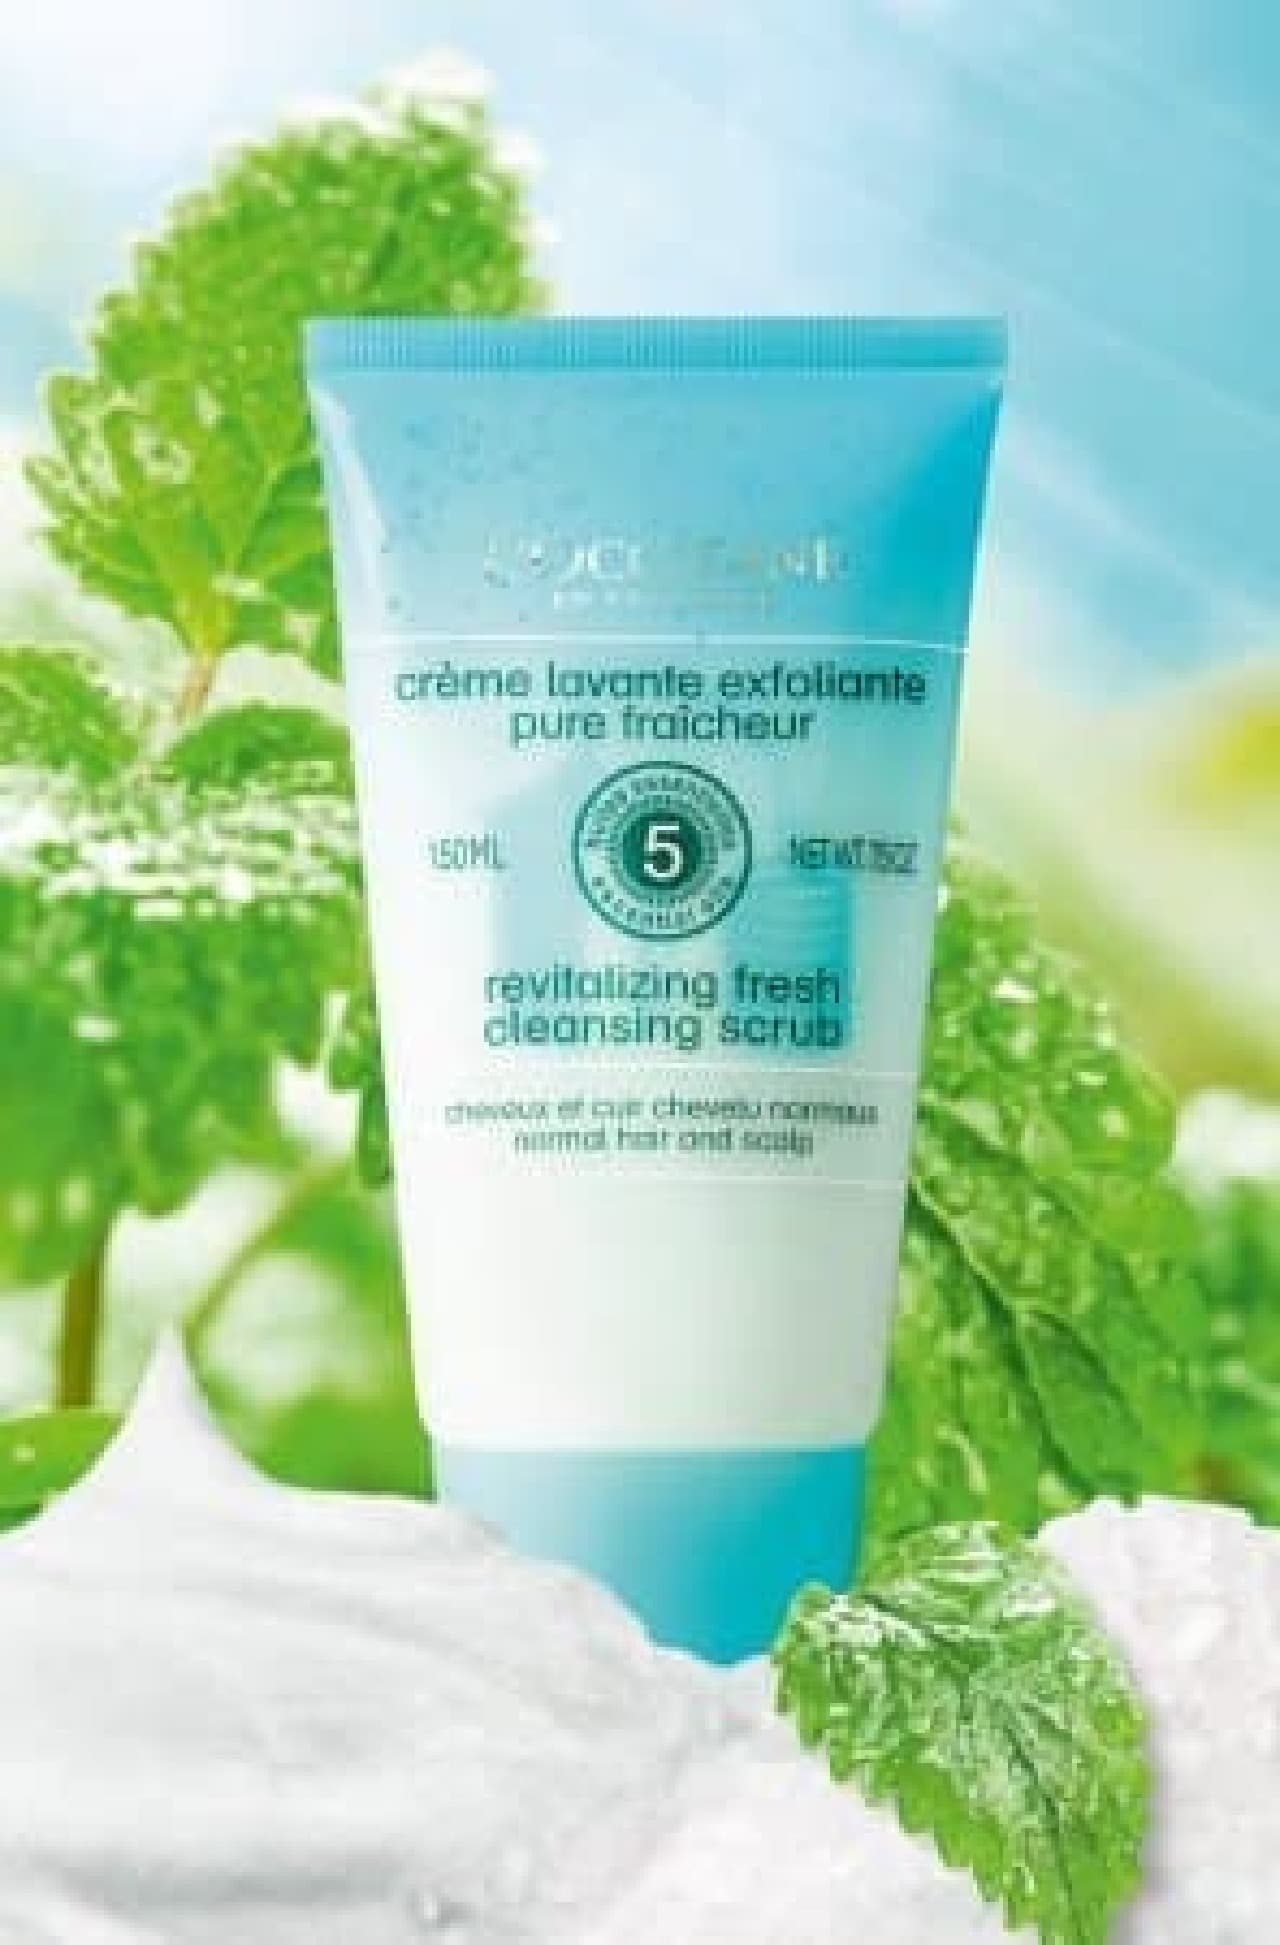 L'Occitane "Five Herbs Pure Freshness Deep Cleansing Care"